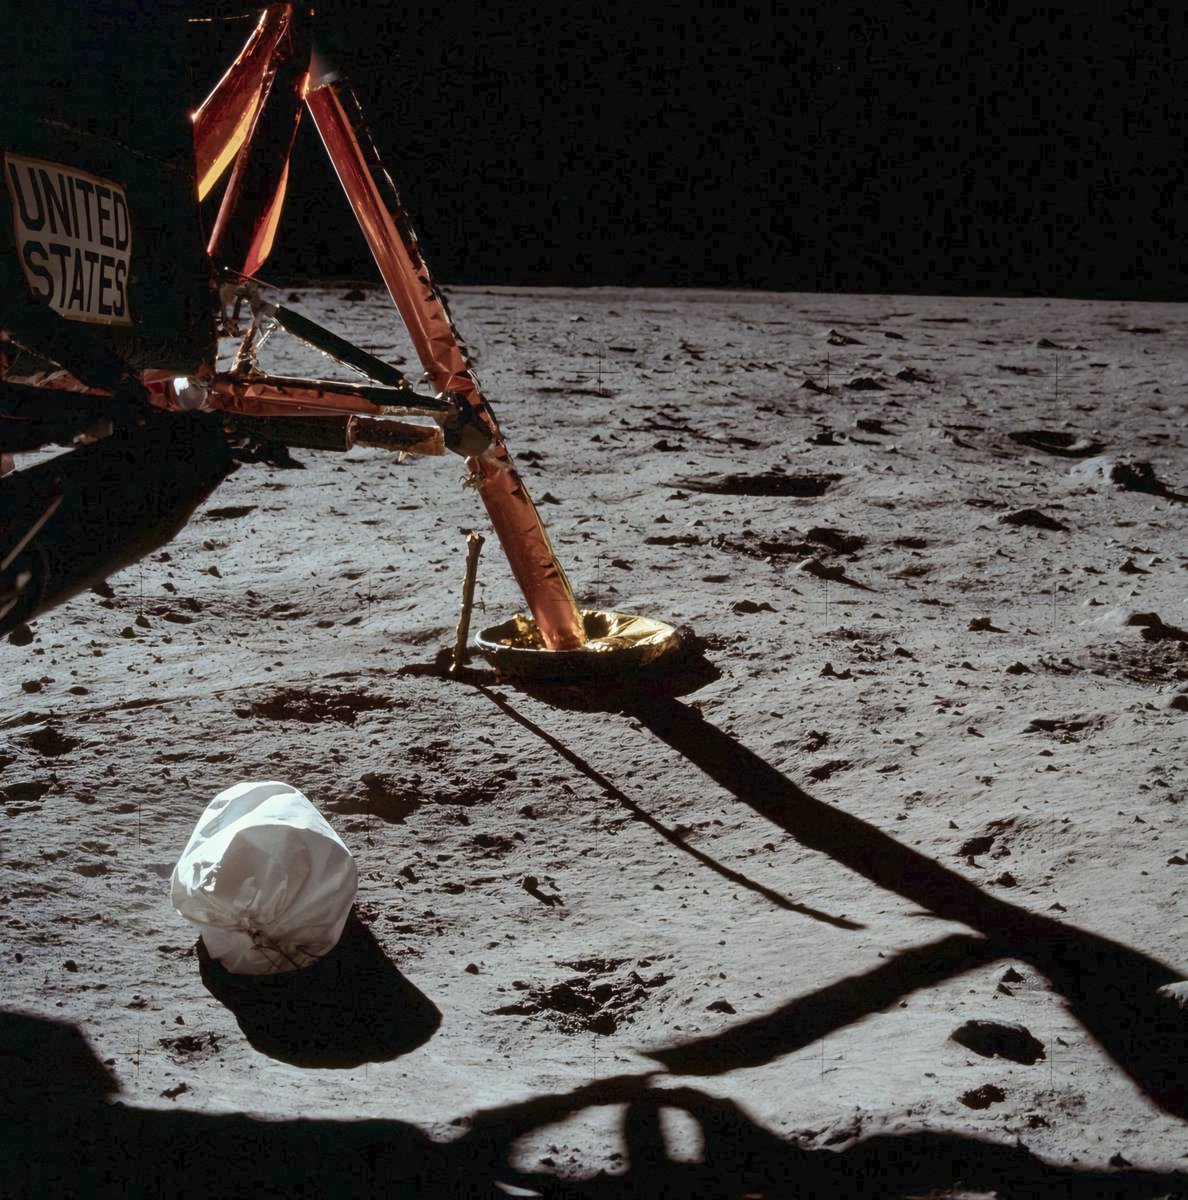 Armstrong's first photo after setting foot on the Moon (with rubbish) #Apollo11 #MOONLanding July 20, 1969 contactlight.de